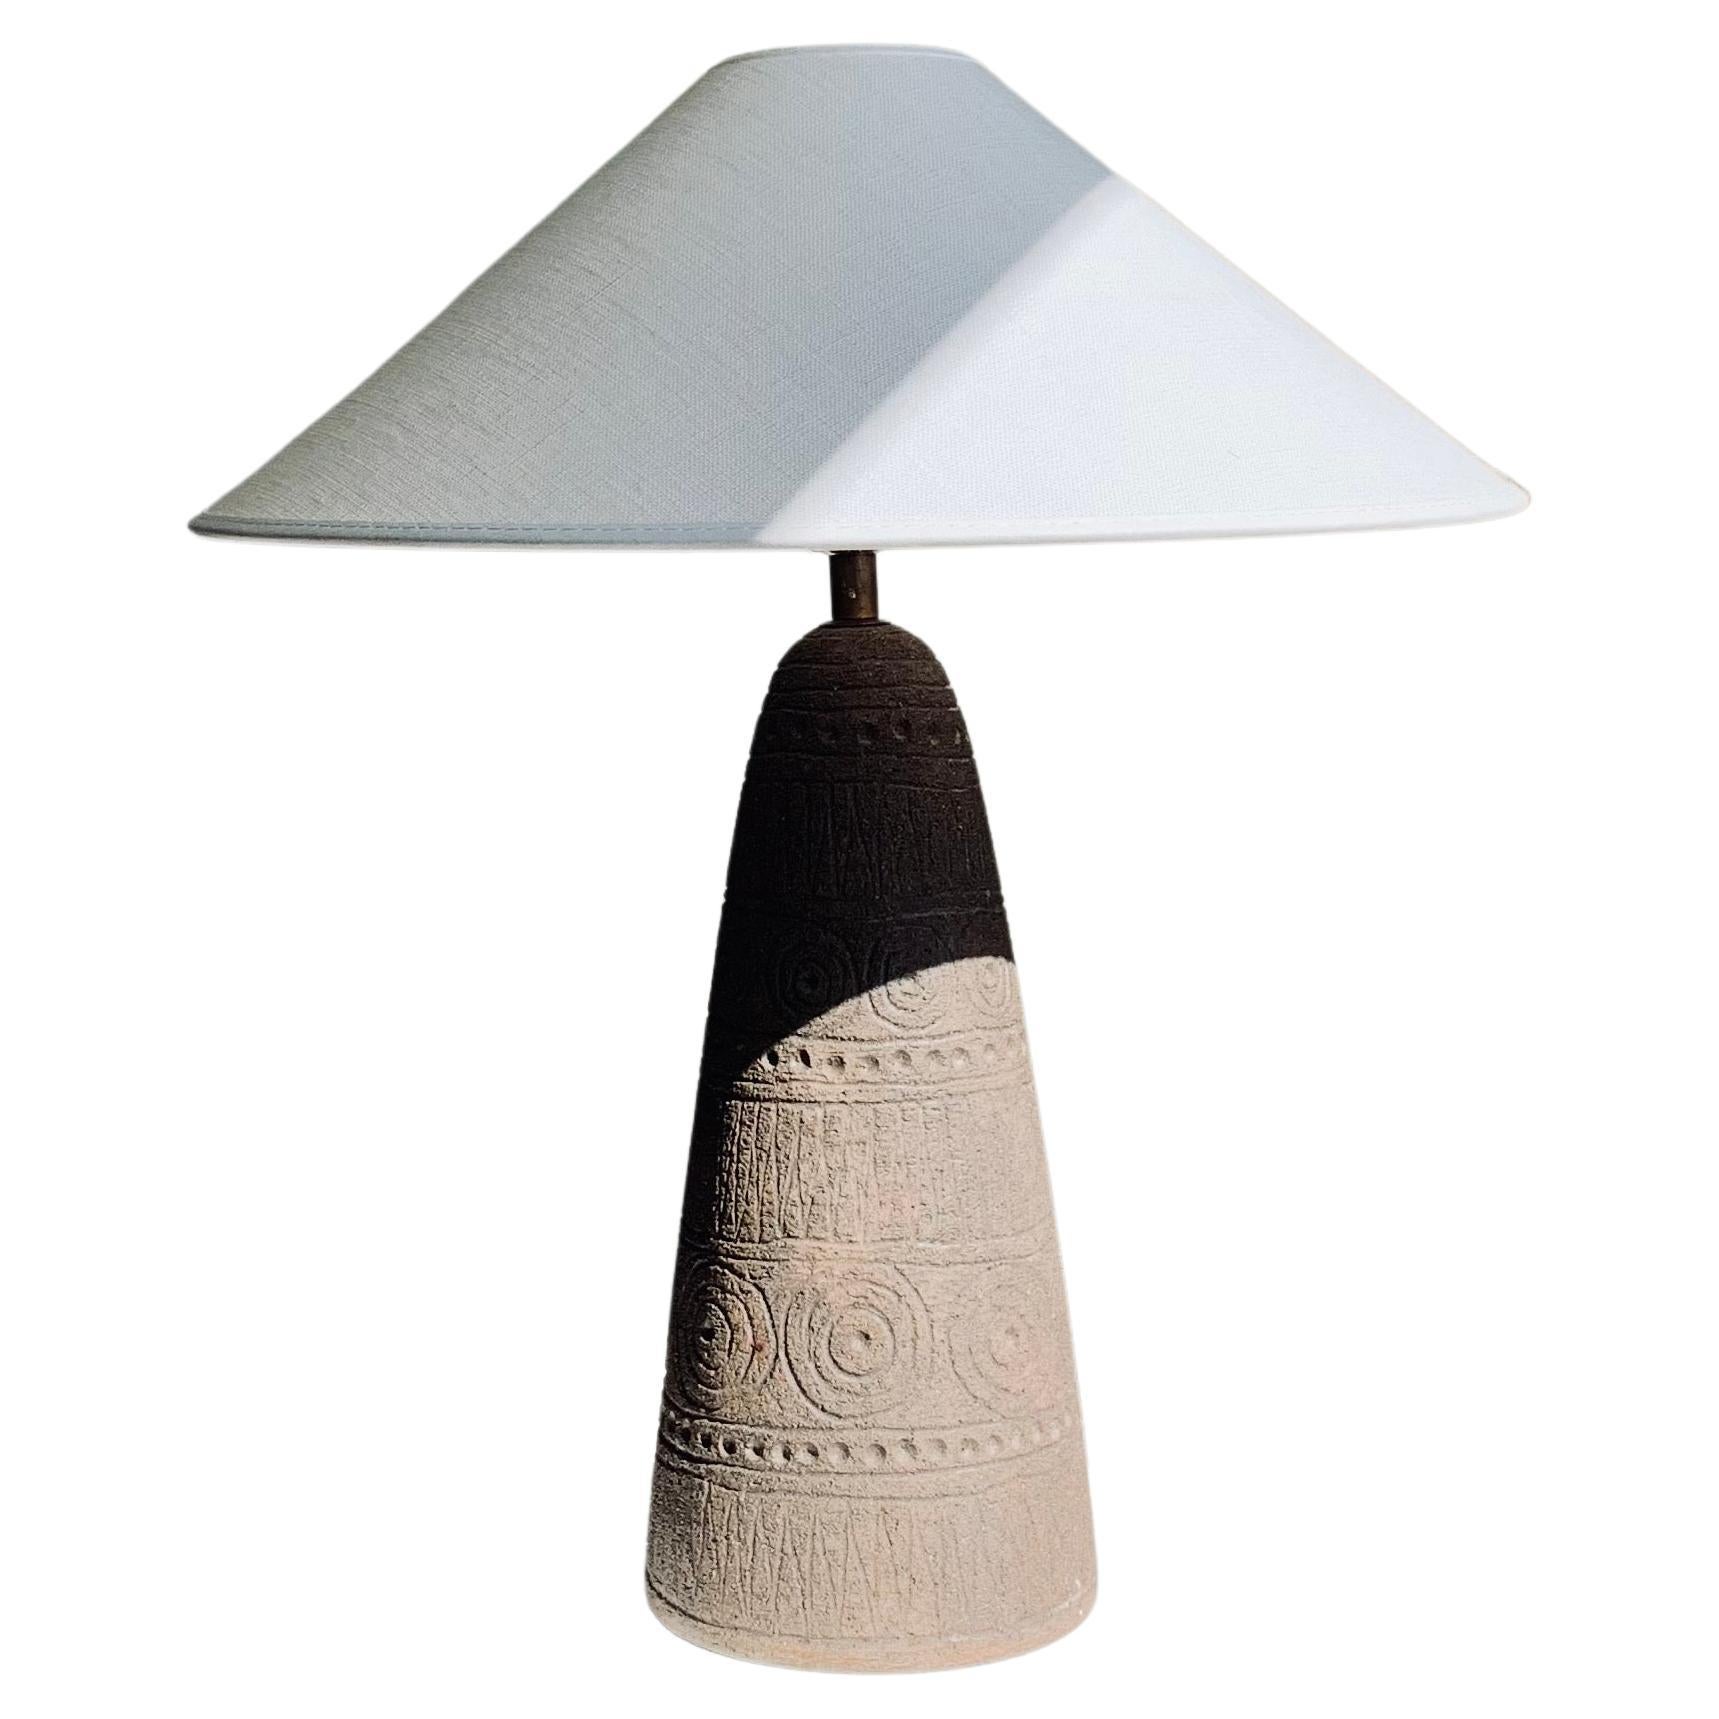 Swedish Modern Rustic Earthenware Ceramic Table Lamp by Elsi Bourelius, 1960s For Sale